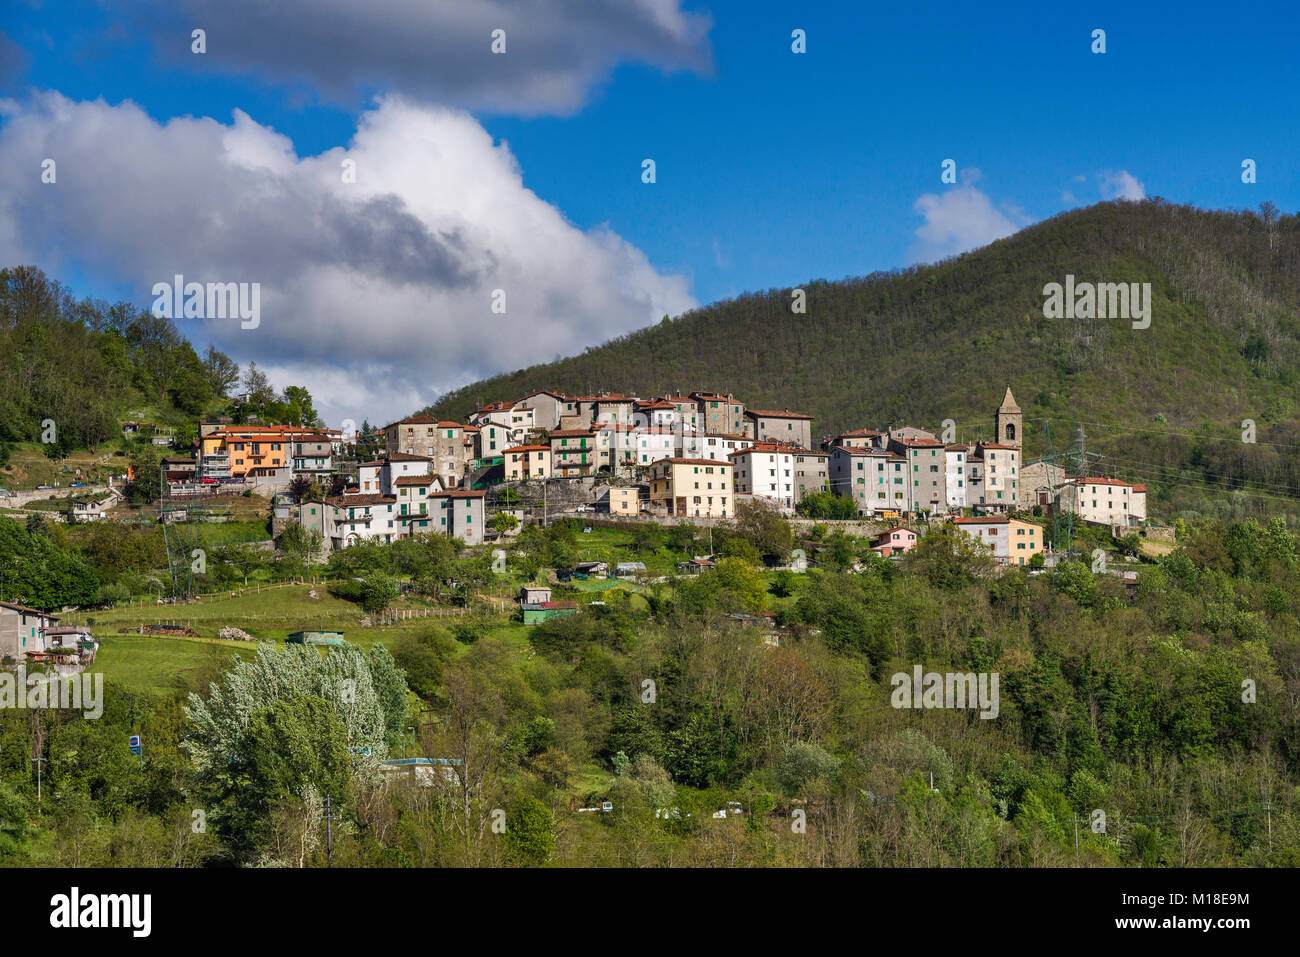 Hill town of Mammiano Basso near San Marcello Pistoiese, Tuscan–Emilian Apennines, view from Via Giardini, road SS12, Tuscany, Italy Stock Photo